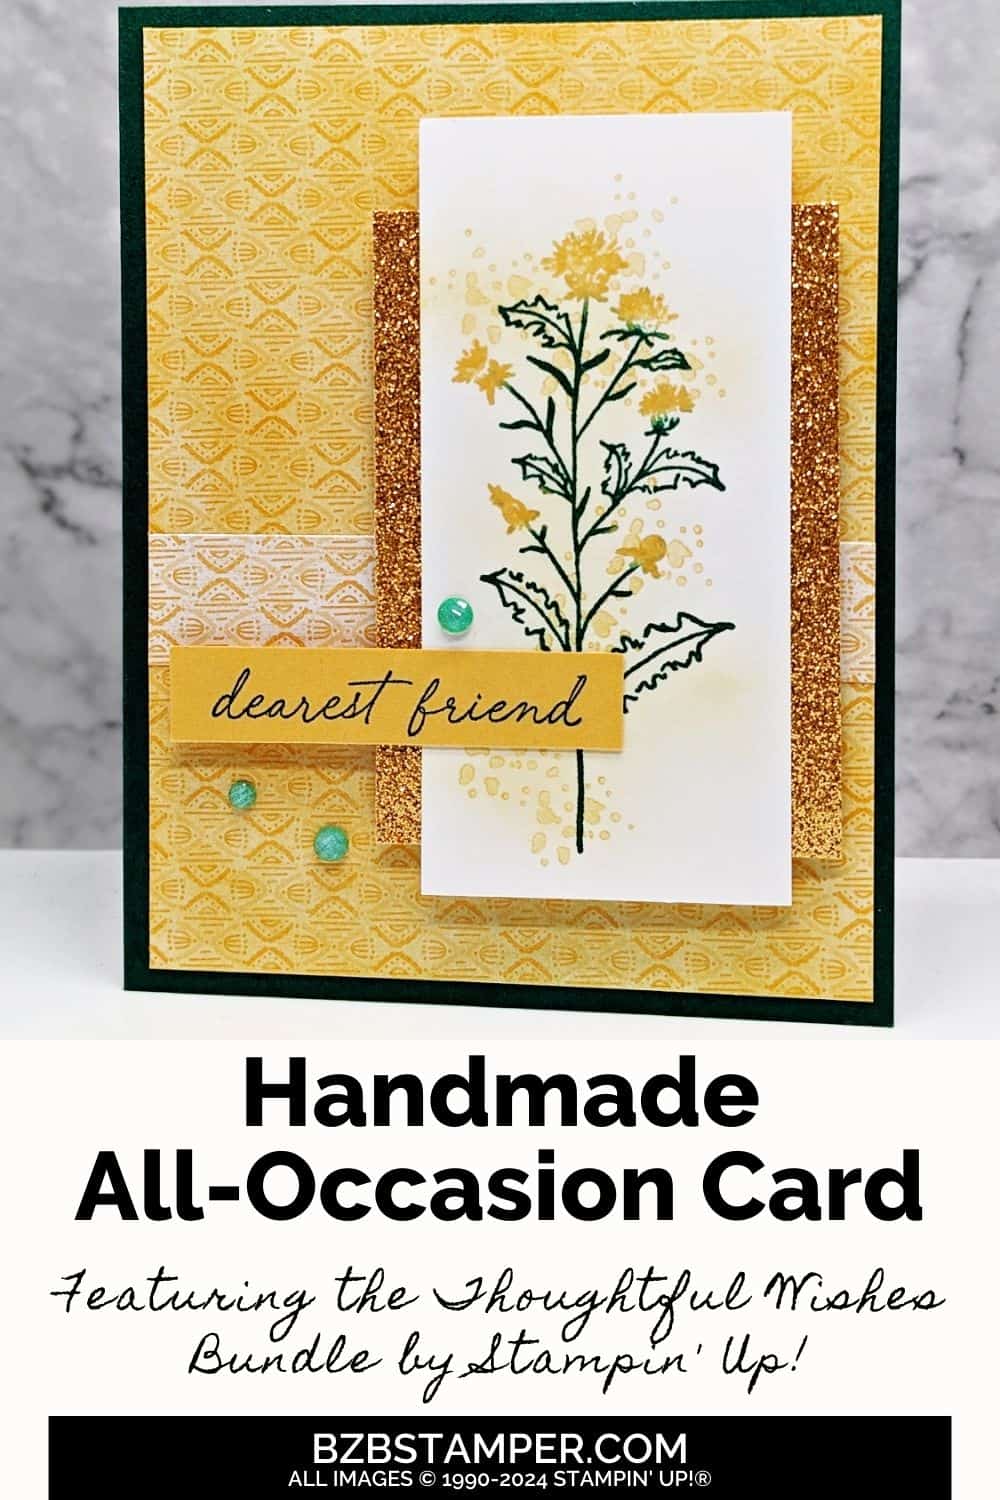 Stamp Your Way To Beautiful Handmade Cards featuring yellow flowers, yellow and gold background papers, and a "dearest friend" sentiment.